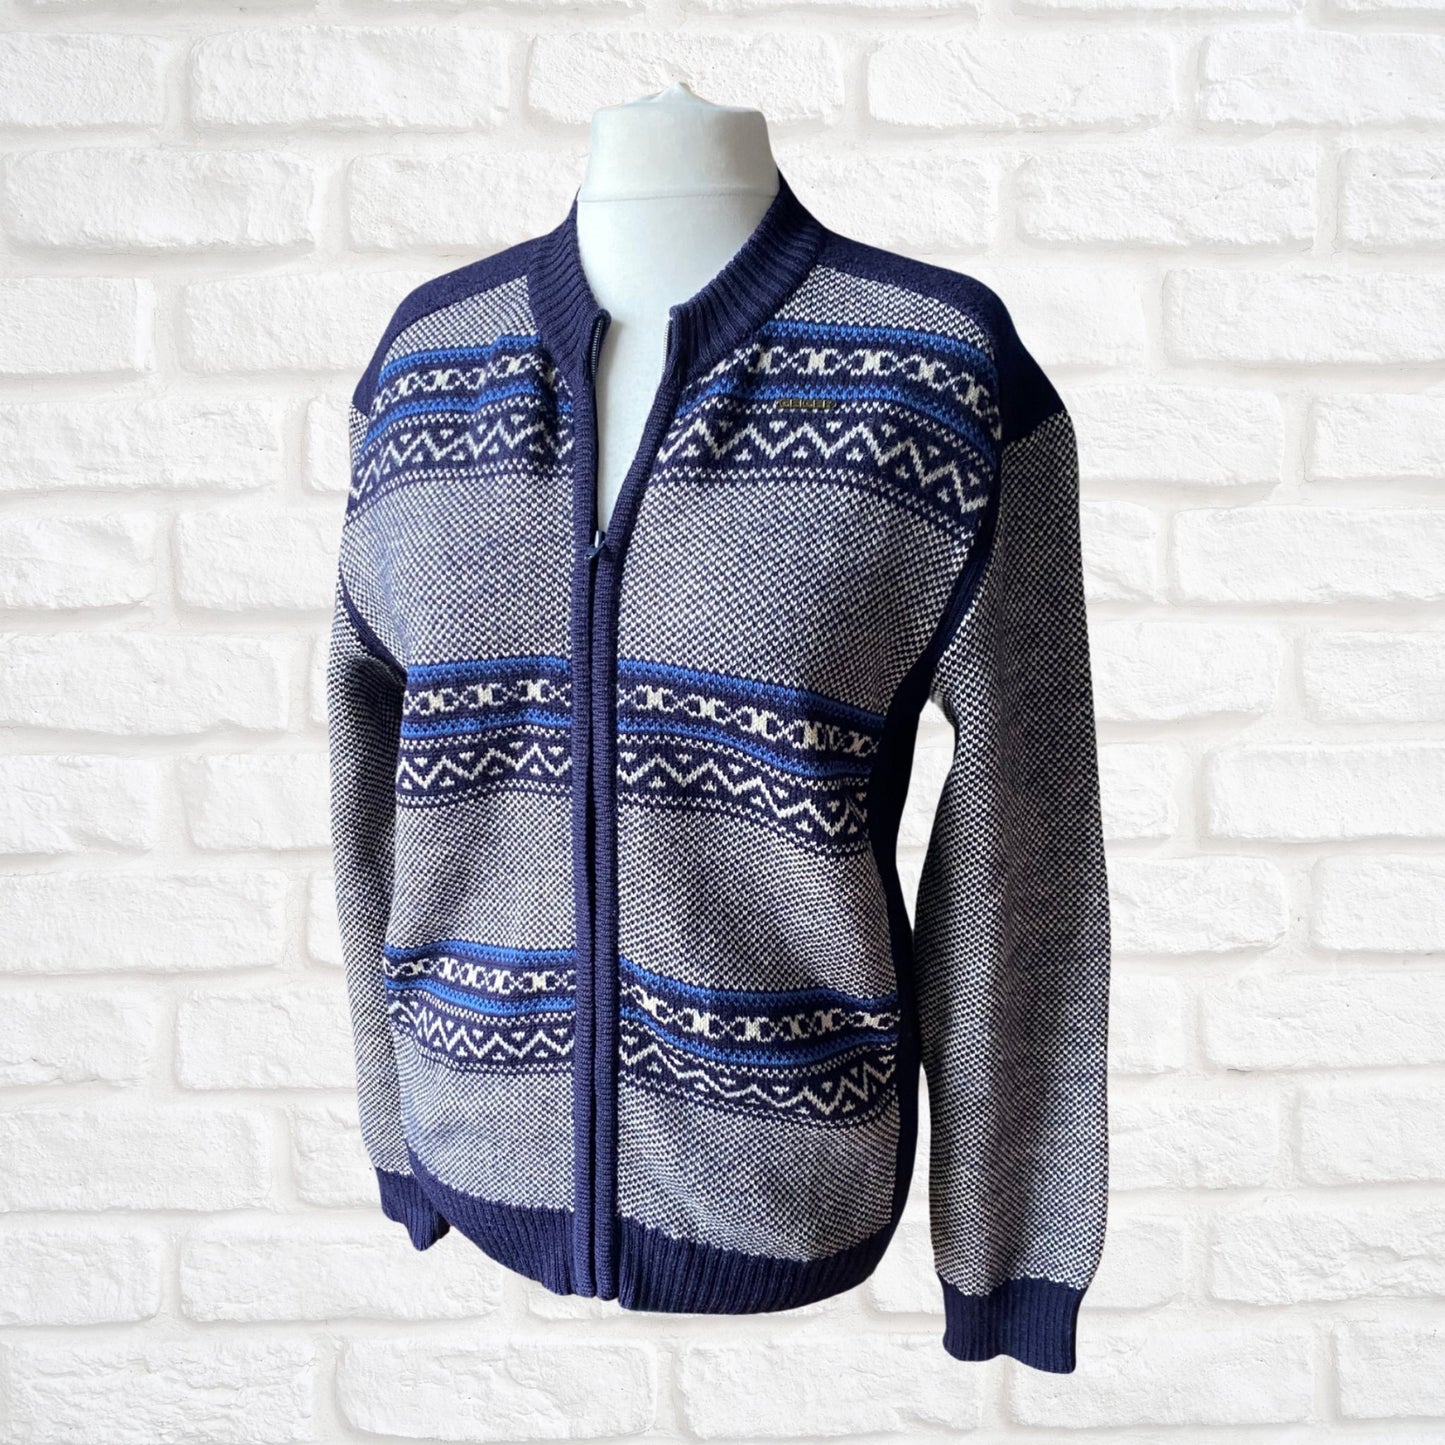 Vintage Blue and White Patterned  Zip Up Wool Cardigan. Approx UK size L -  XL ( men) / 20-22 (women)